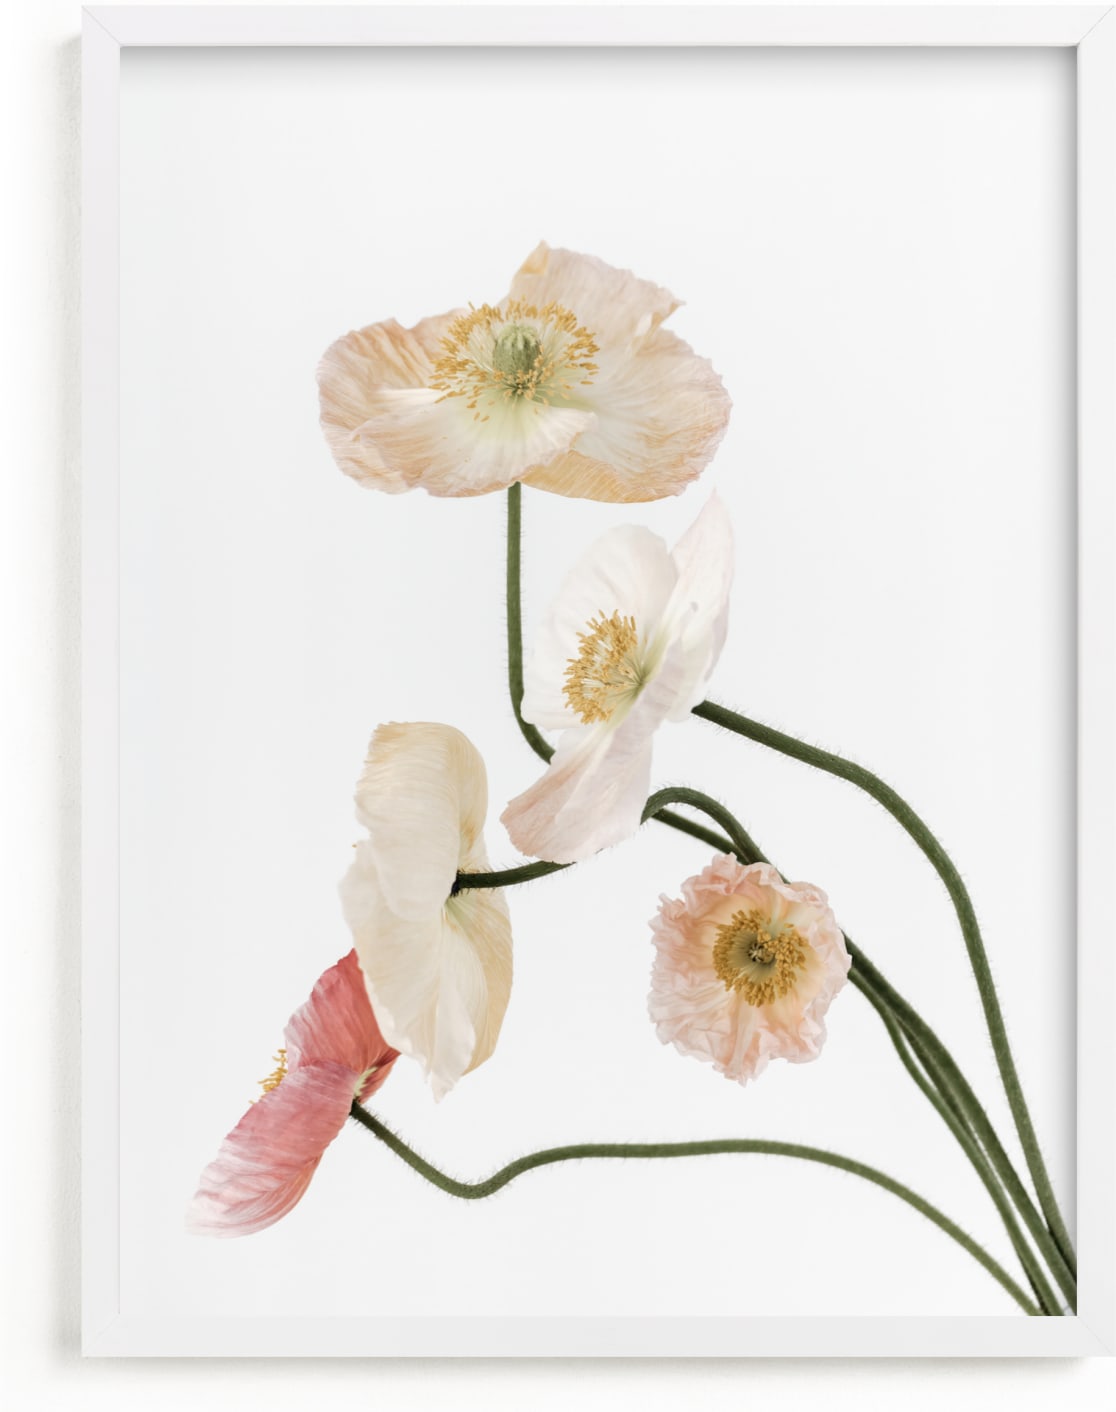 This is a white, pink, green art by Blustery August called Poppies II.